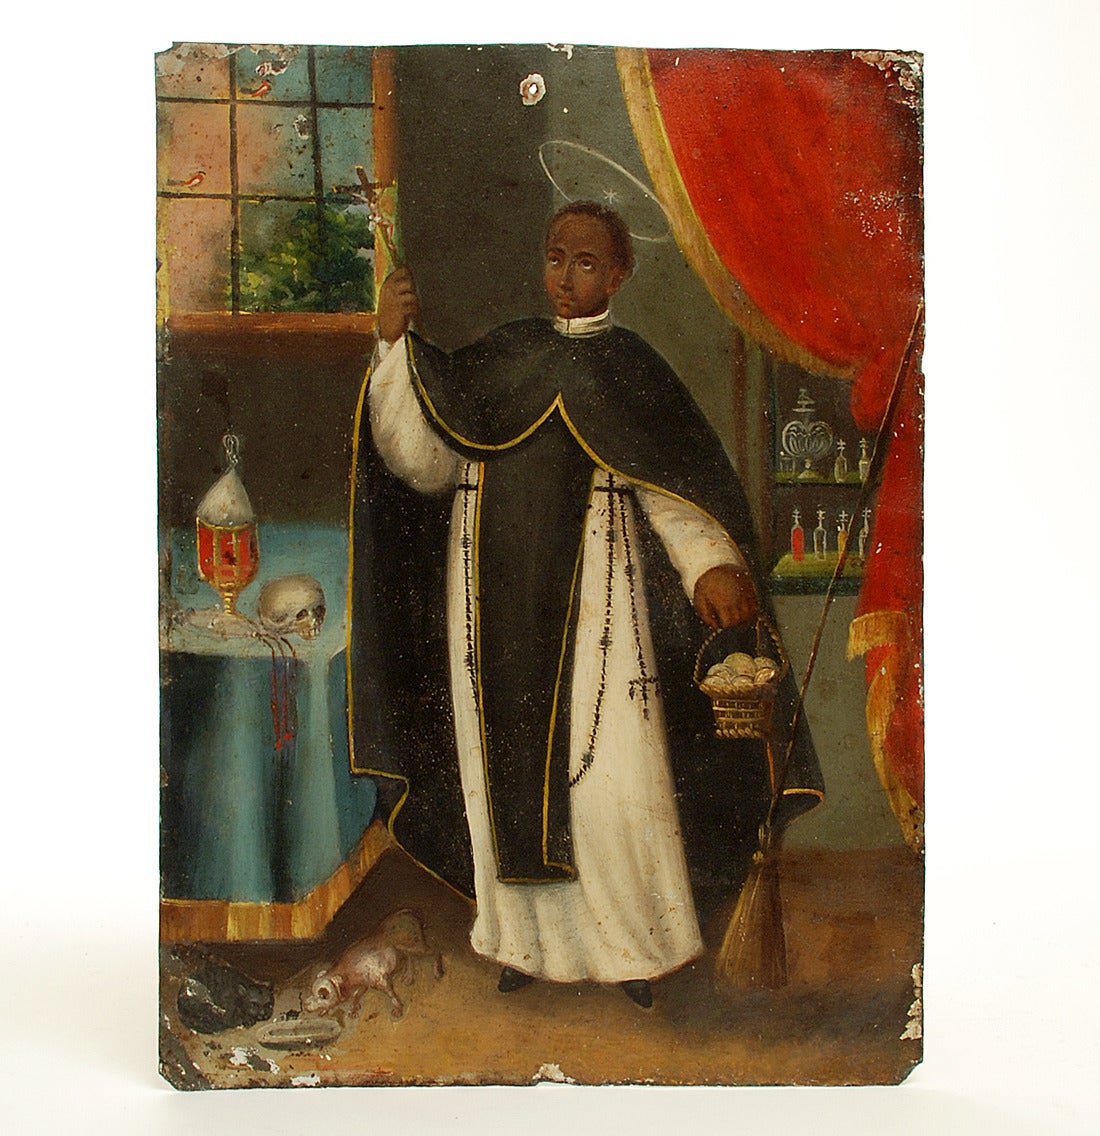 San Martin de Porres, patron saint of black people, mixed races, the impoverished, hair stylists and public educators, is depicted in this exceptionally rare 19th century Mexican retablo. In retablo art, San Martin is almost always accompanied by a